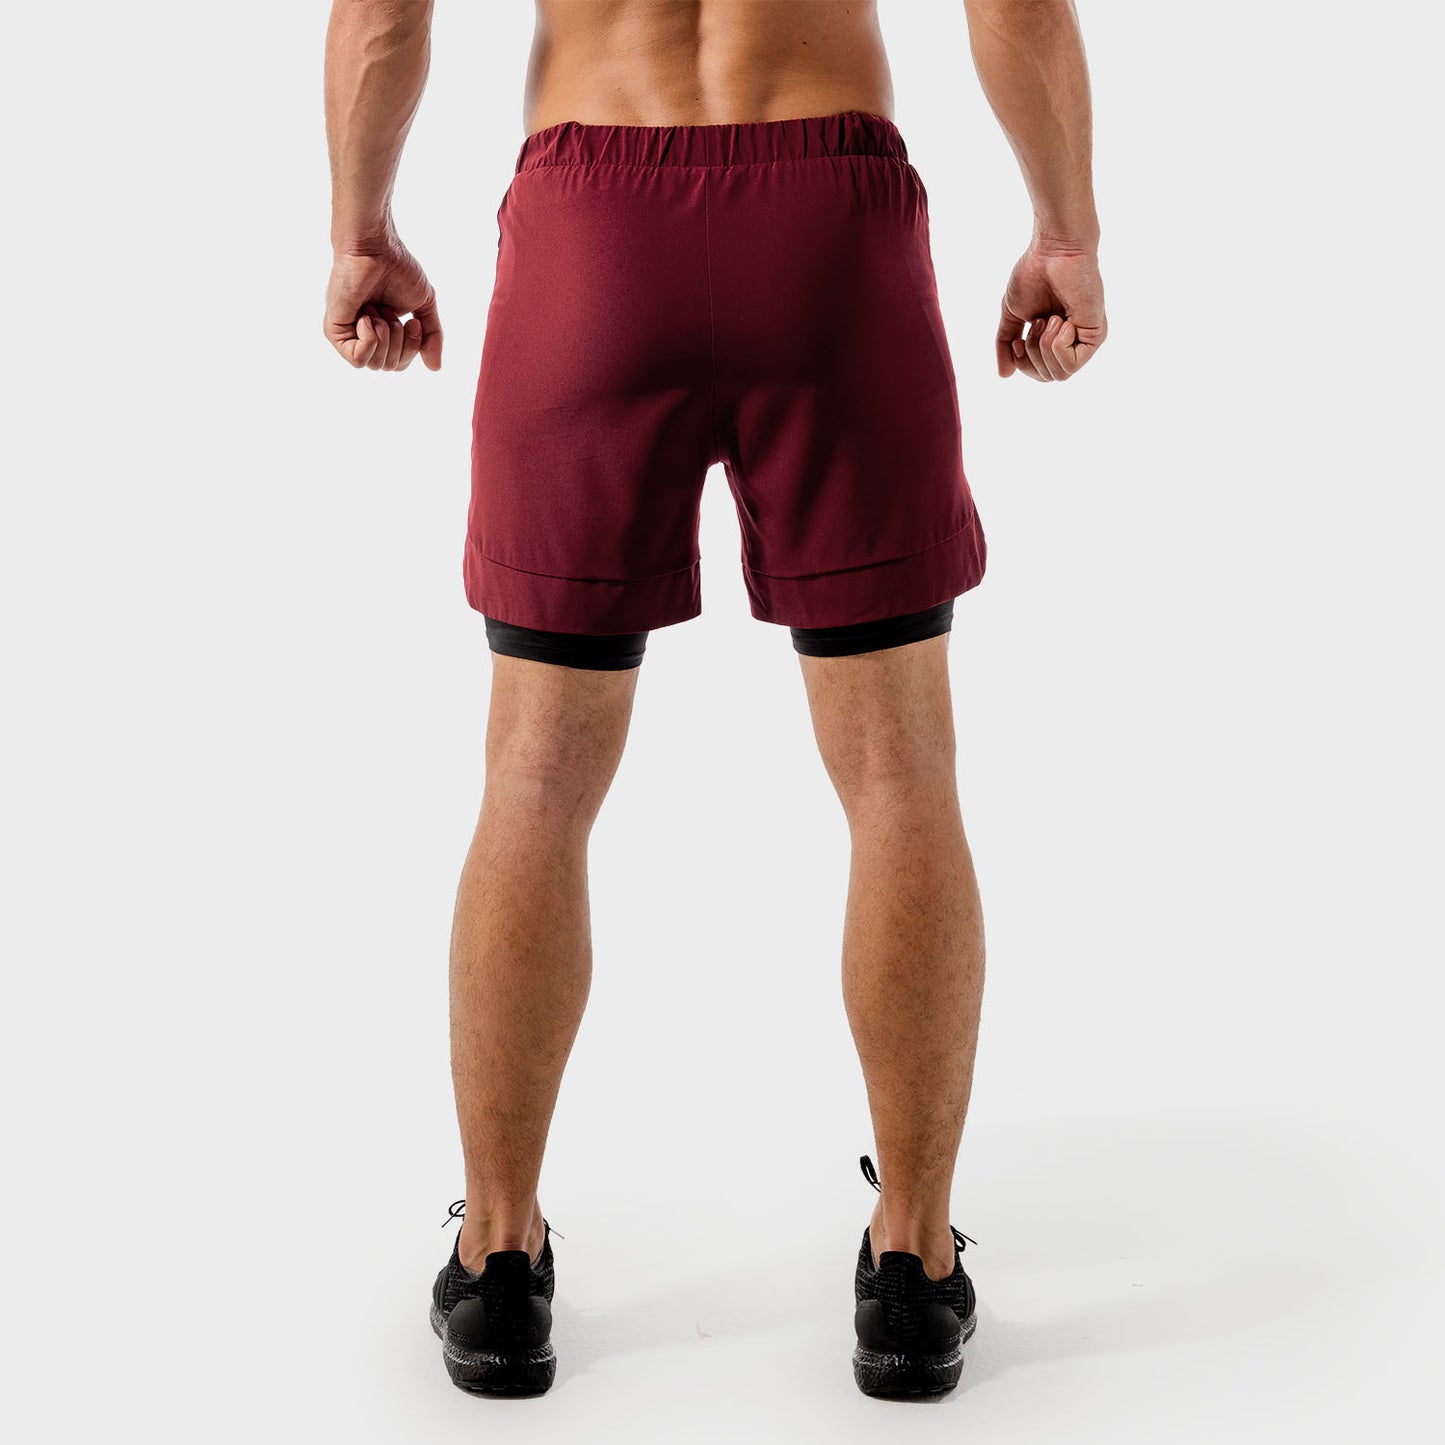 squatwolf-workout-short-for-men-limitless-2-in-1-shorts-maroon-gym-wear